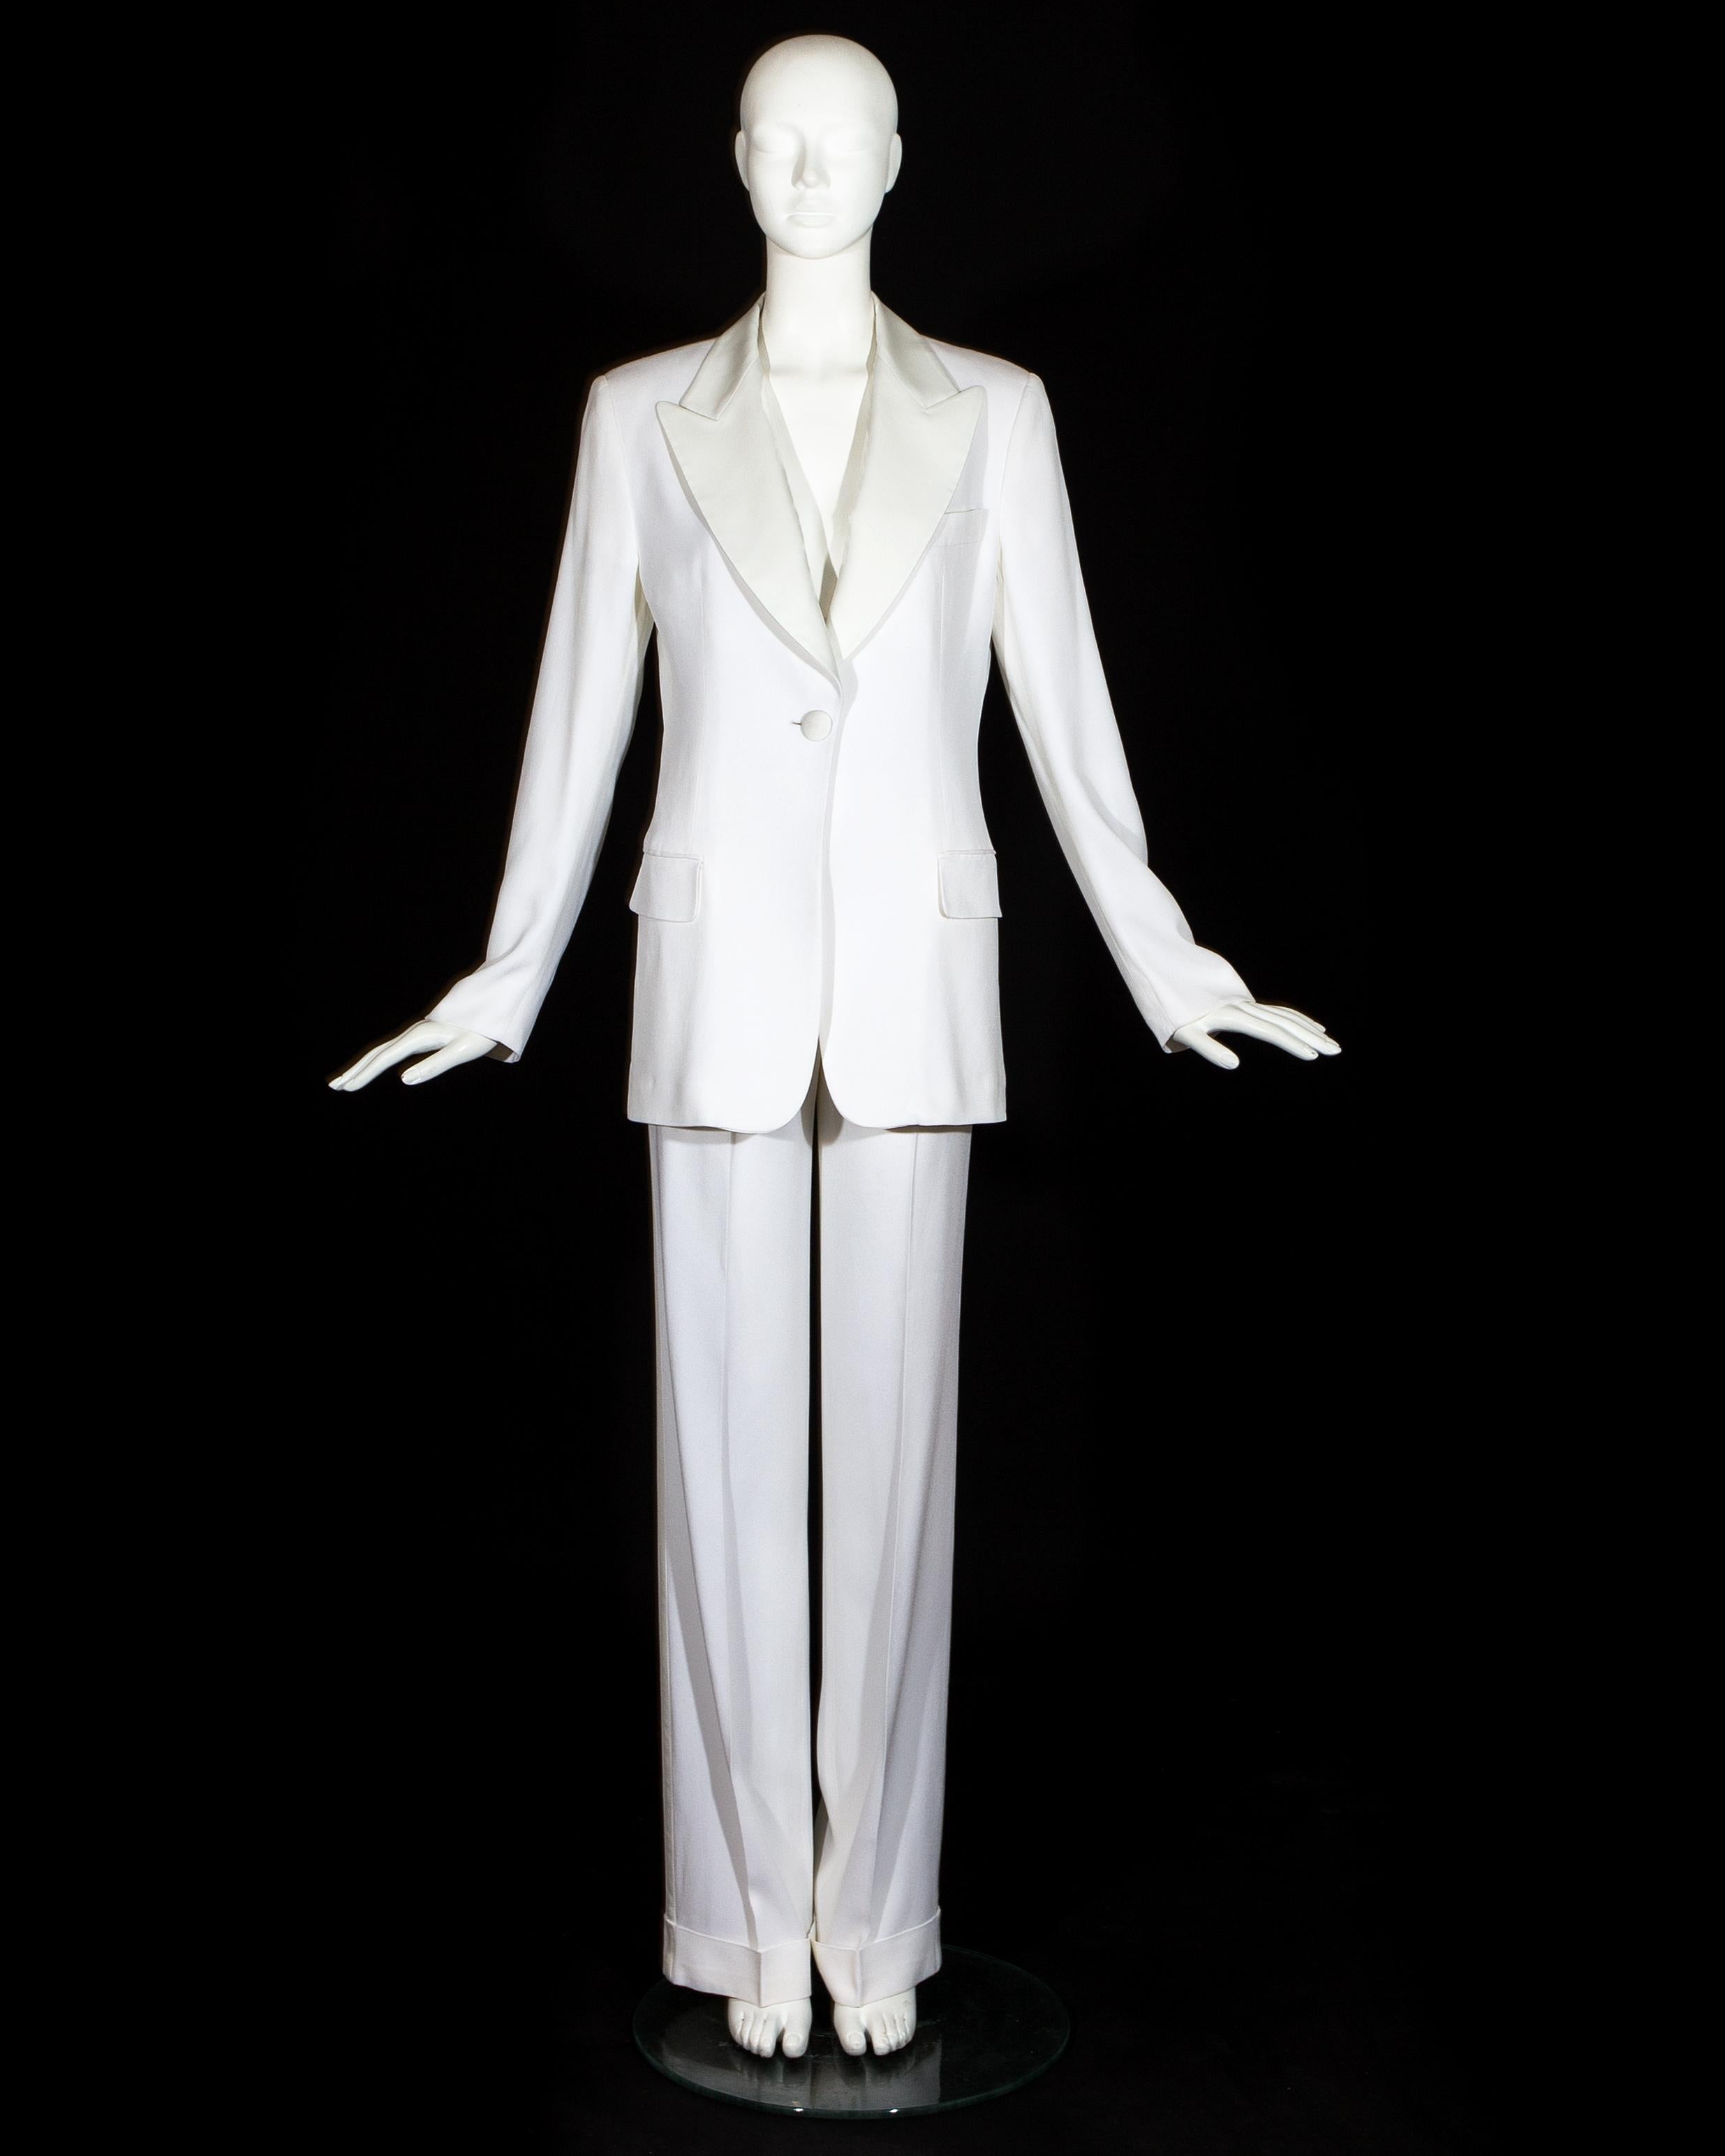 Bianca Jagger inspired pant suit. White crepe with silk lapels and buttons. Loose cut pants with tailored fitted blazer jacket.

Spring-Summer 1995